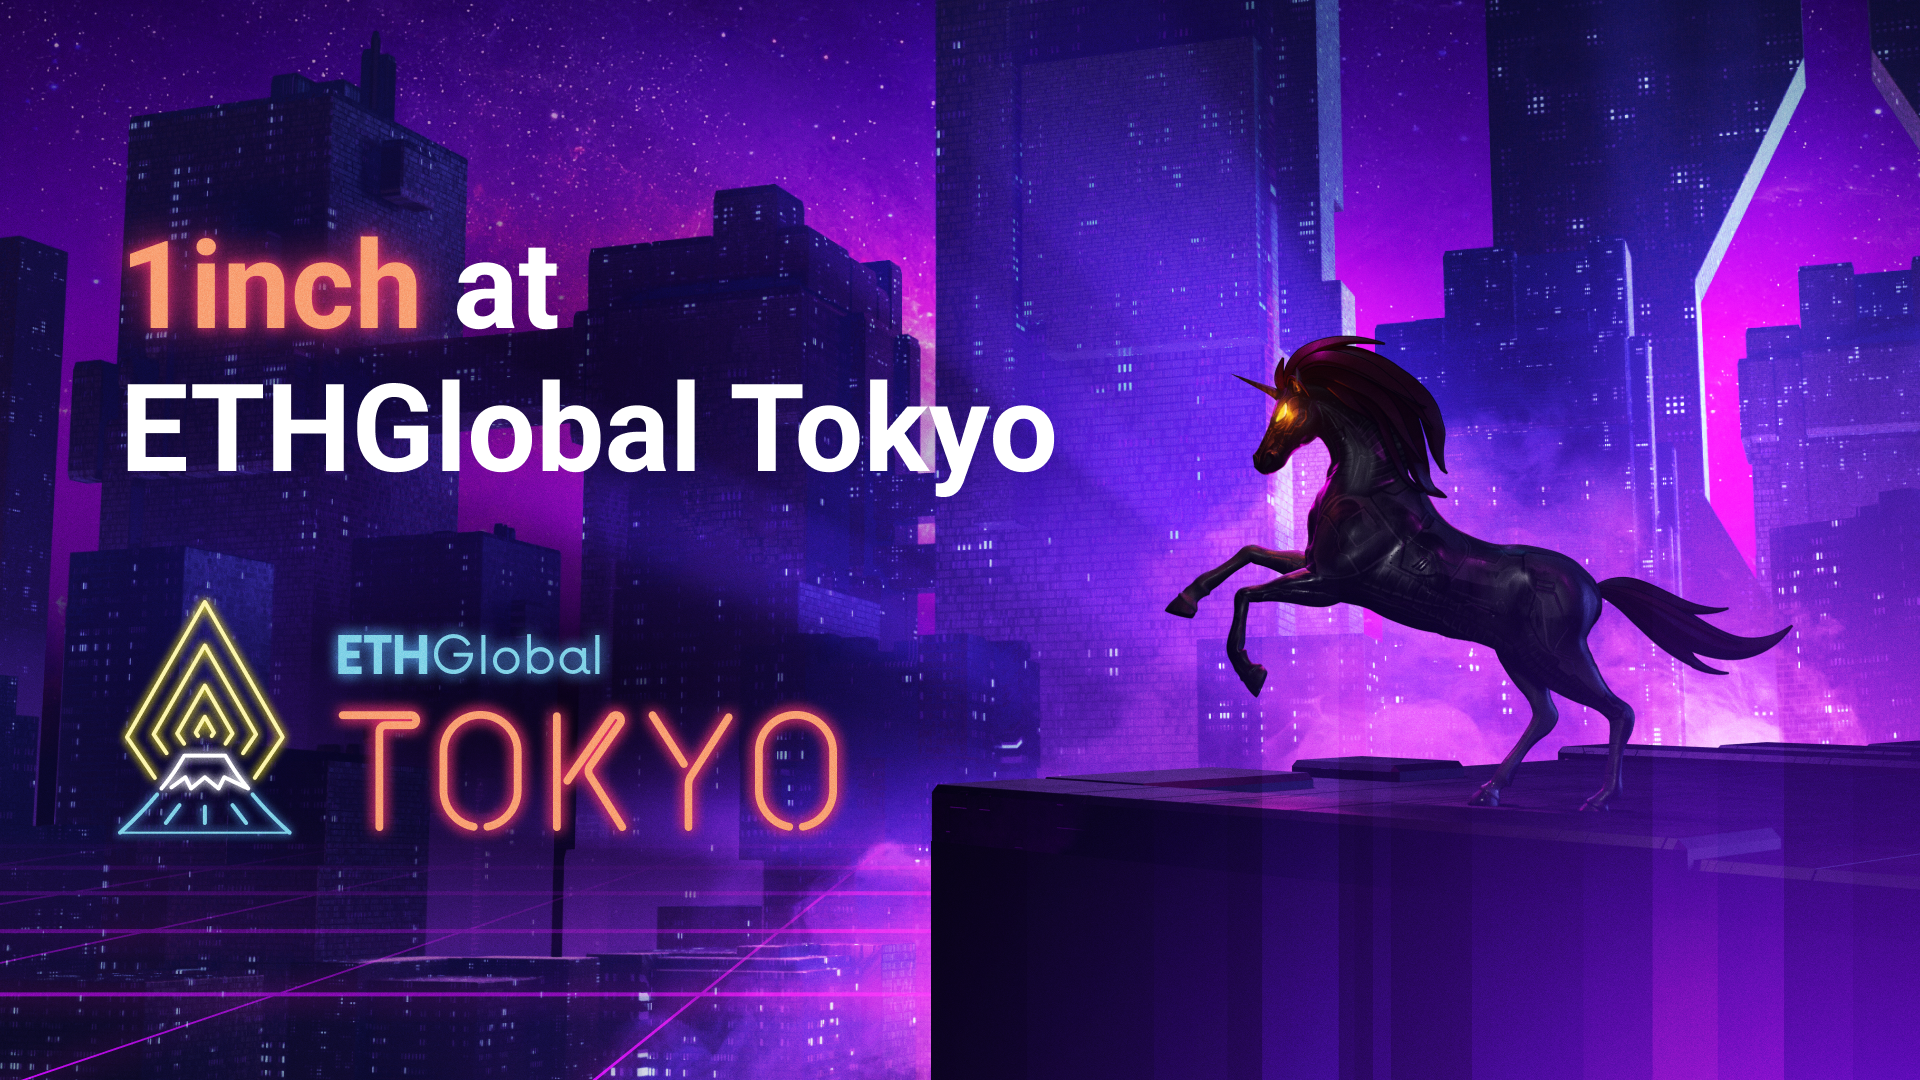 1inch will support ETHGlobal Tokyo